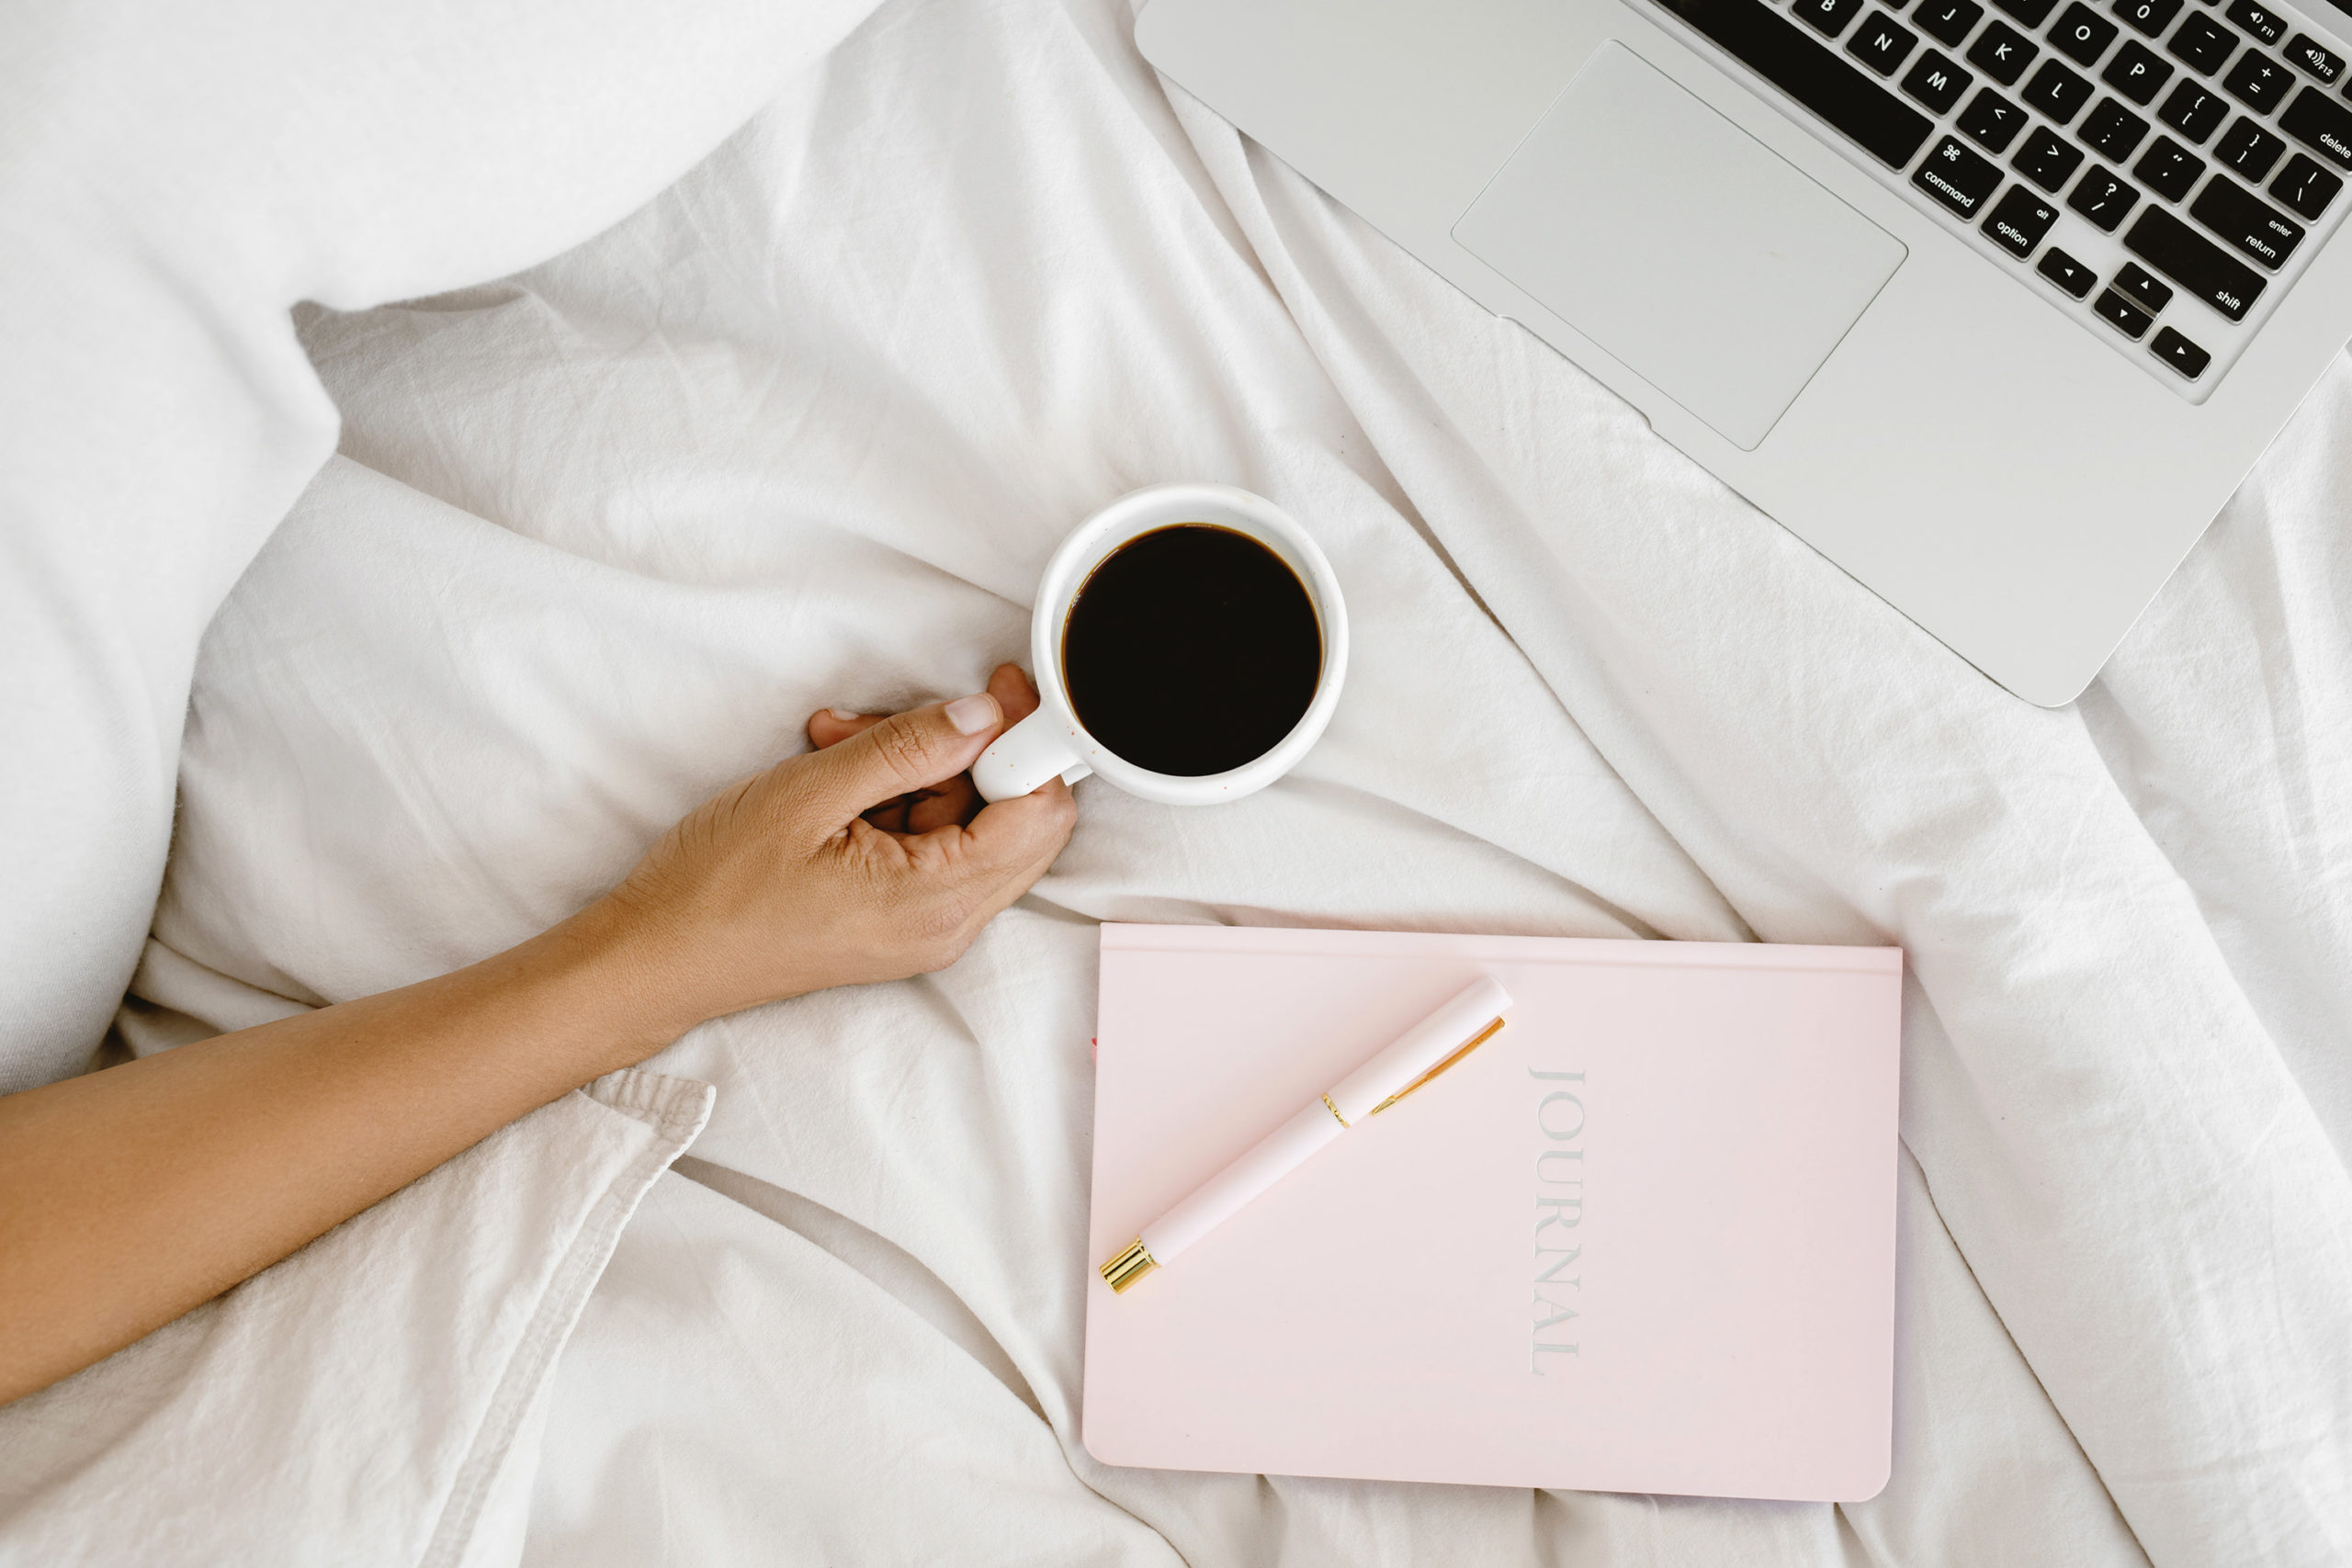 A cozy bed with white linen and a hand holding a coffee along side a pink notebook and computer at the edge of the picture!